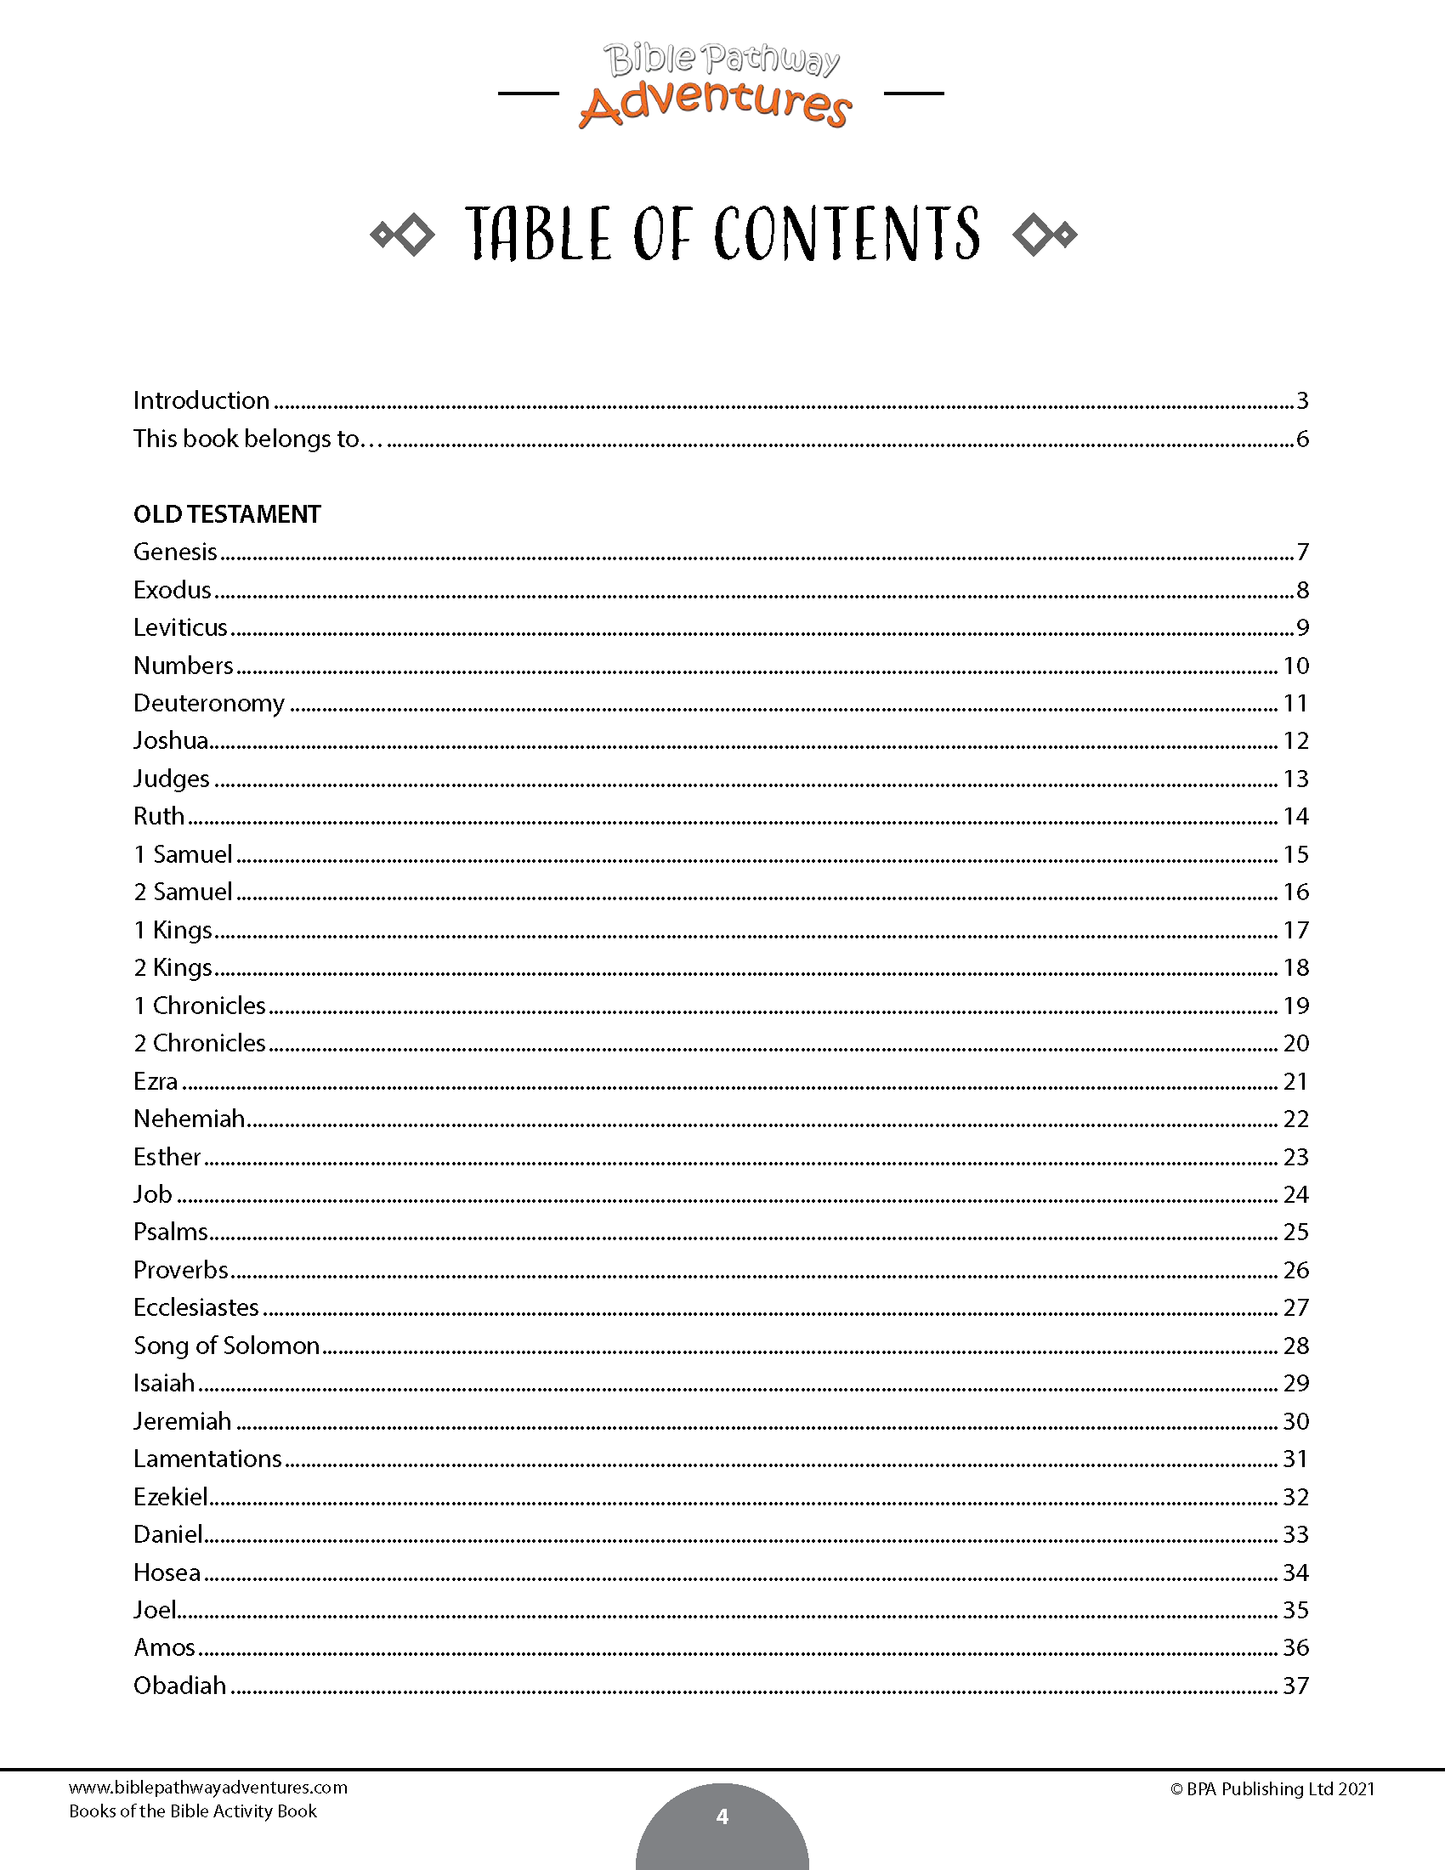 Books of the Bible Activity Book (paperback)